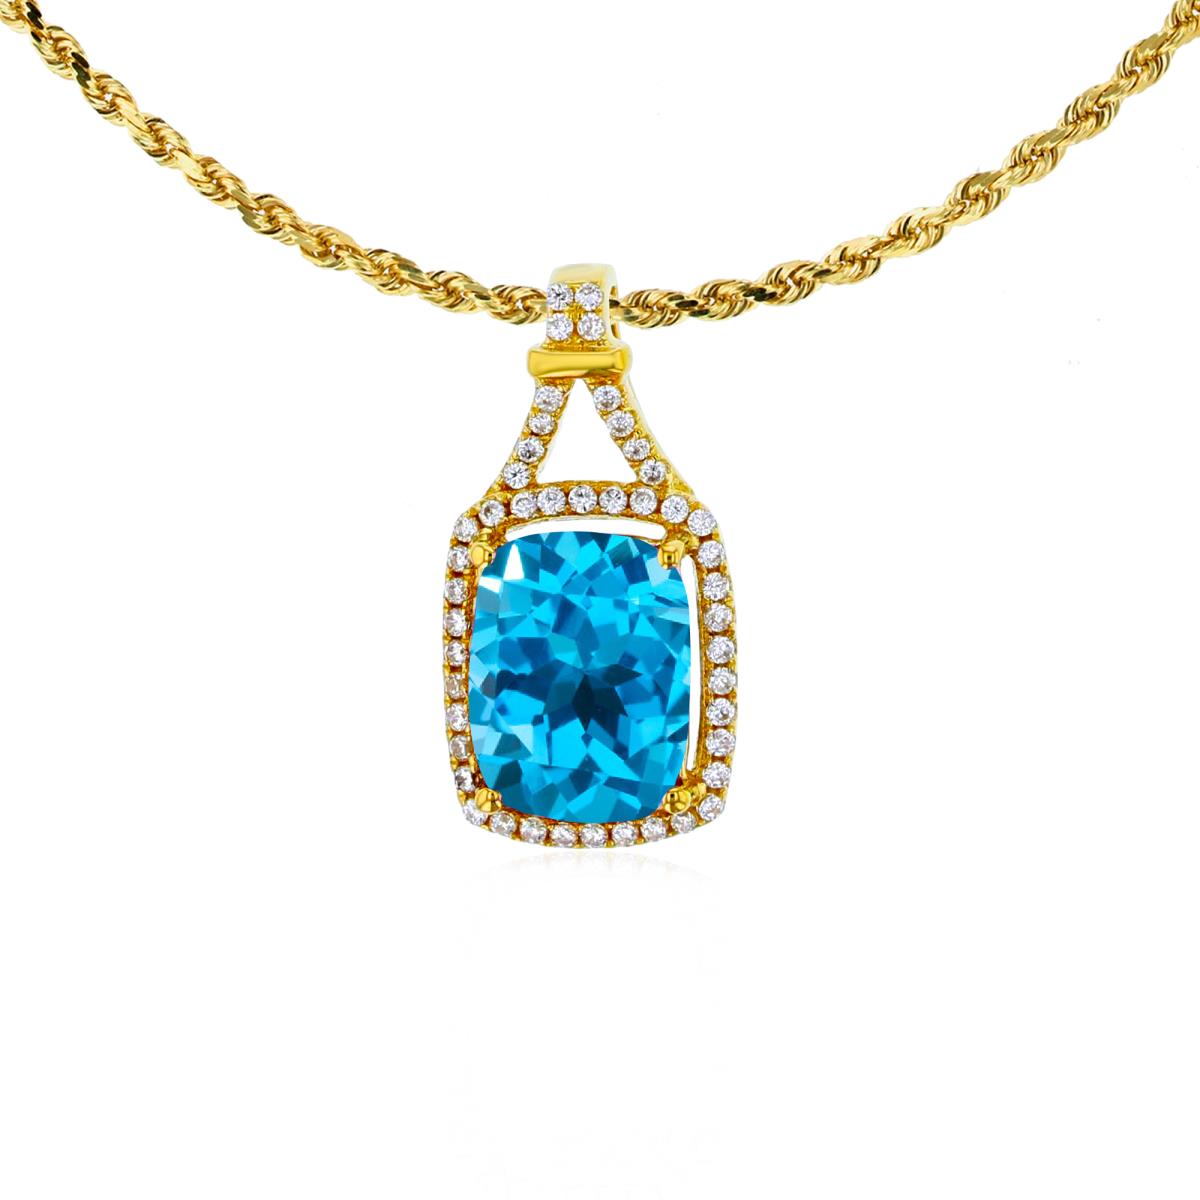 14K Yellow Gold 8x6mm Cushion Swiss Blue Topaz & 0.13 CTTW Rd Diamonds Halo 18" Rope Chain Necklace